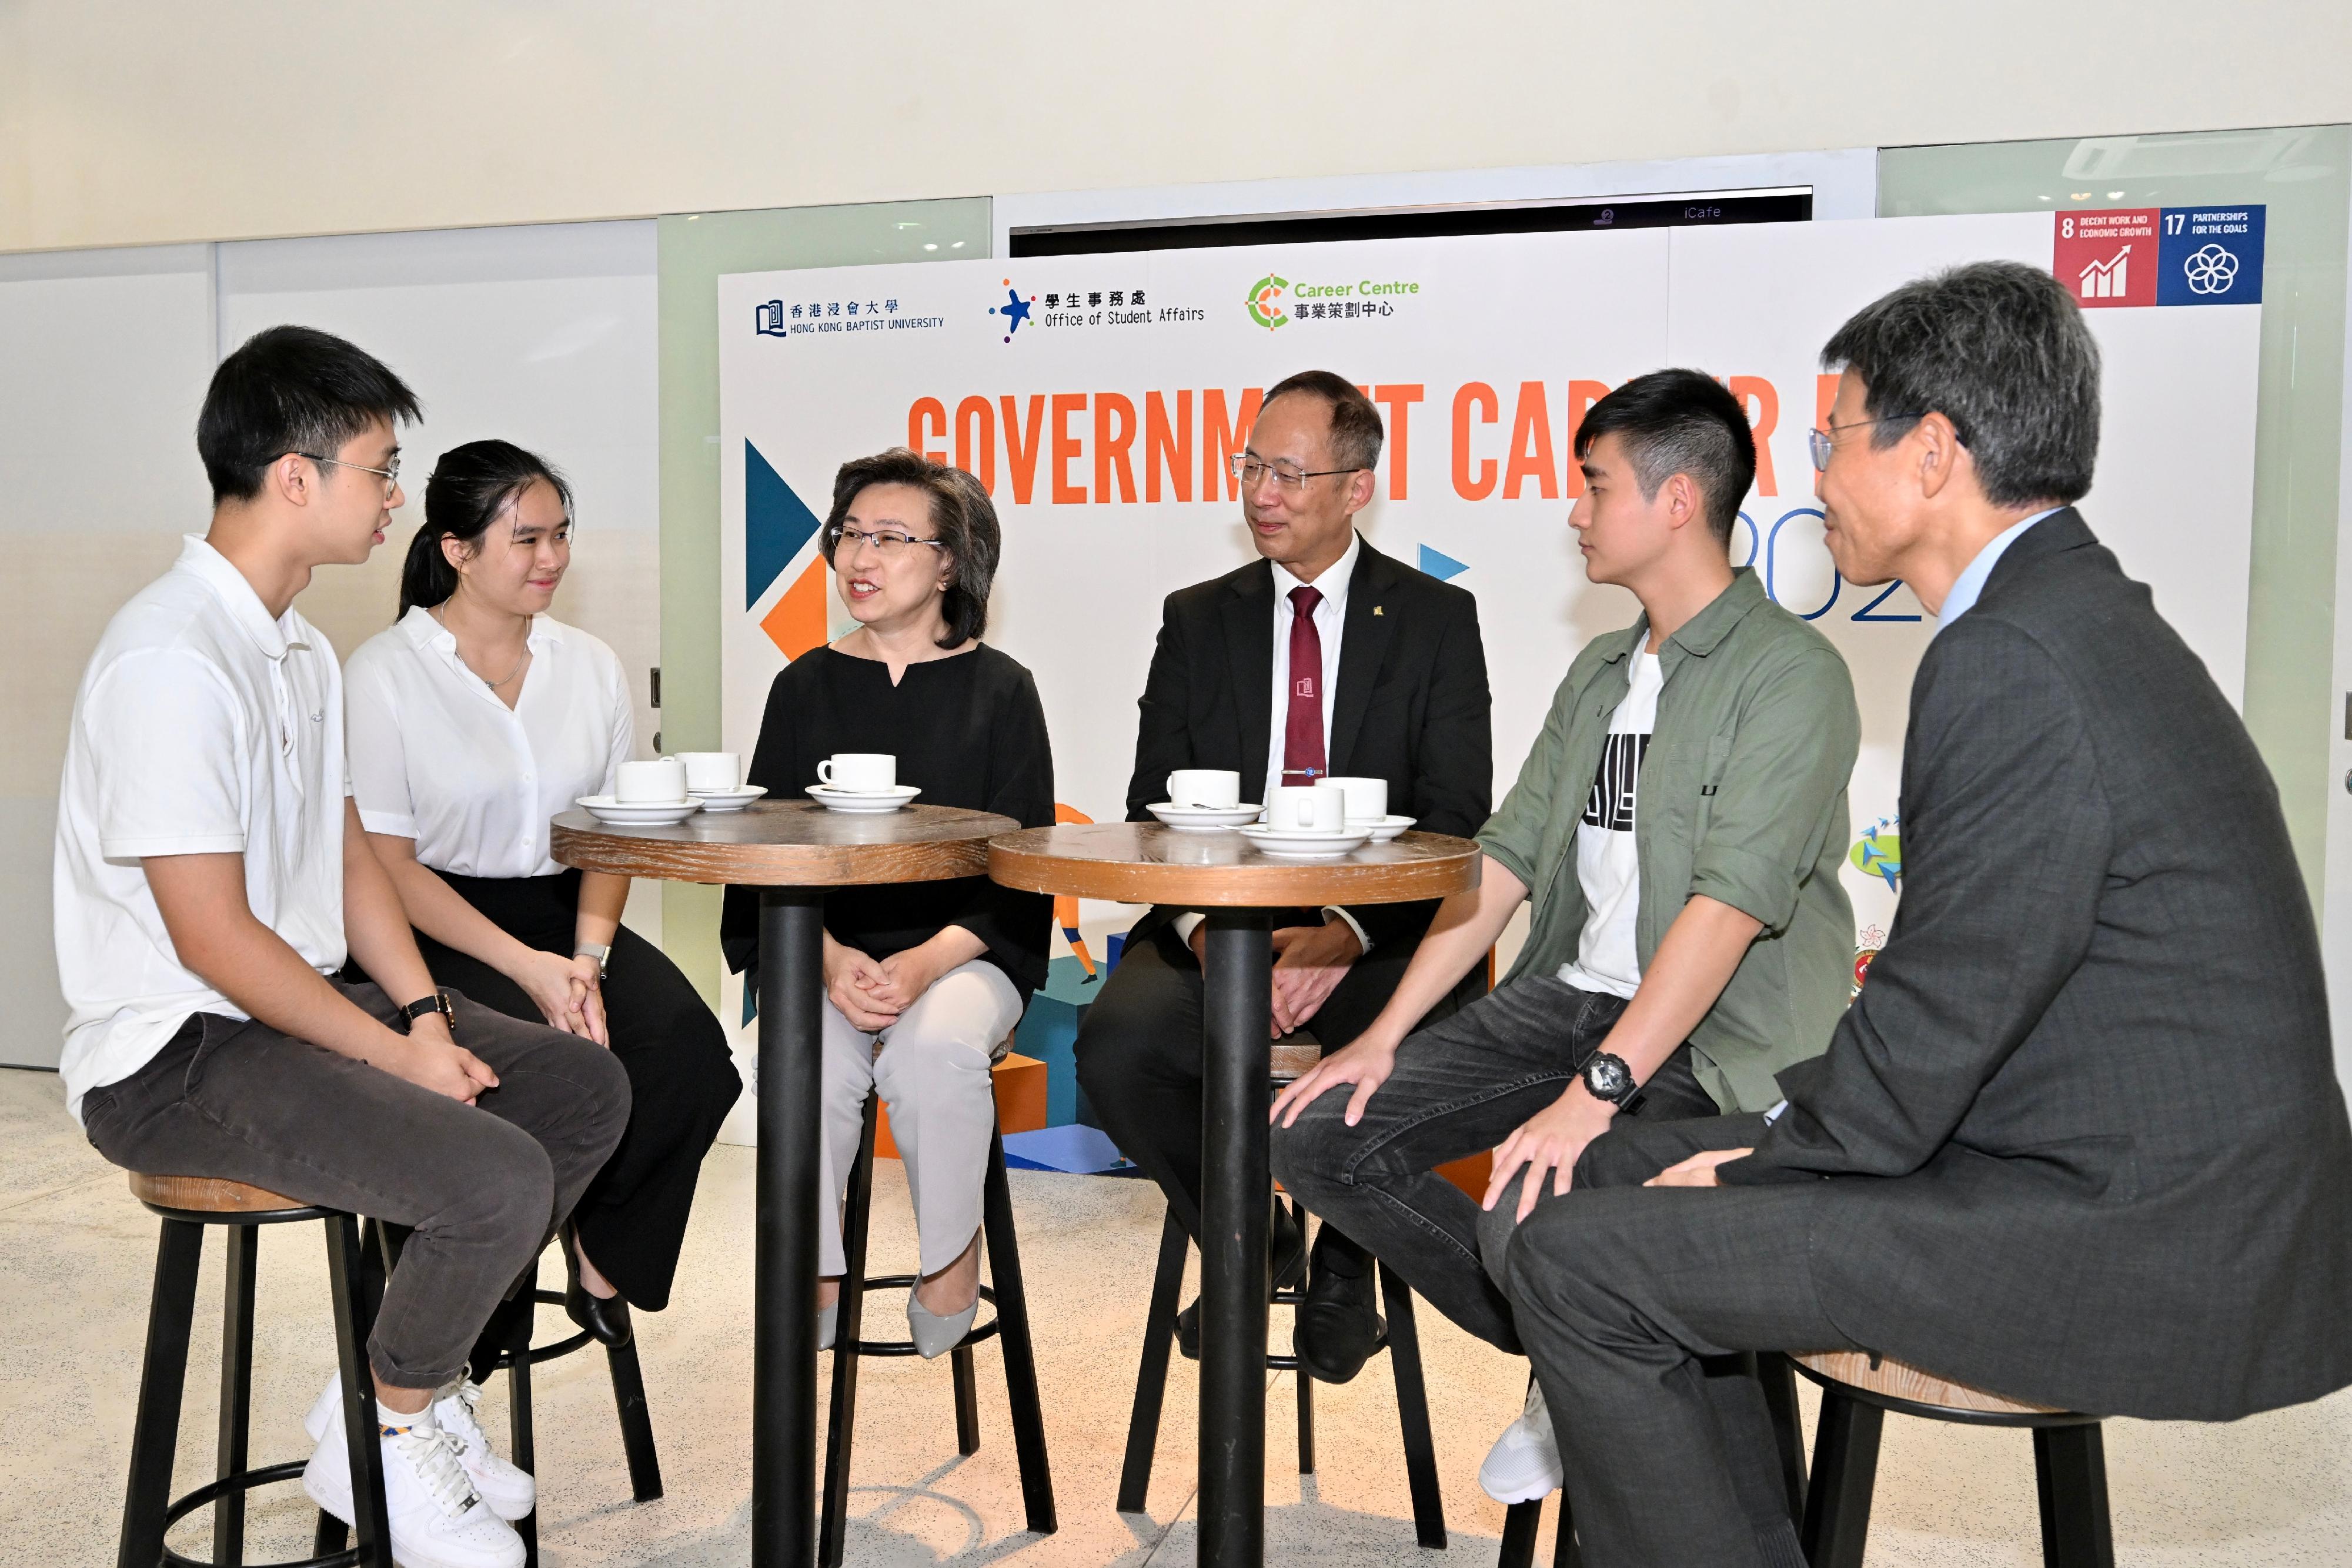 The Secretary for the Civil Service, Mrs Ingrid Yeung, visited the Government Career Fair being held at the campus of Hong Kong Baptist University (HKBU) today (September 20). Photo shows Mrs Yeung (third left); the President and Vice-Chancellor of HKBU, Professor Alexander Wai (third right); and the Vice-President (Teaching and Learning) of HKBU, Dr Albert Chau (first right), chatting with students to know their career plans and aspirations.